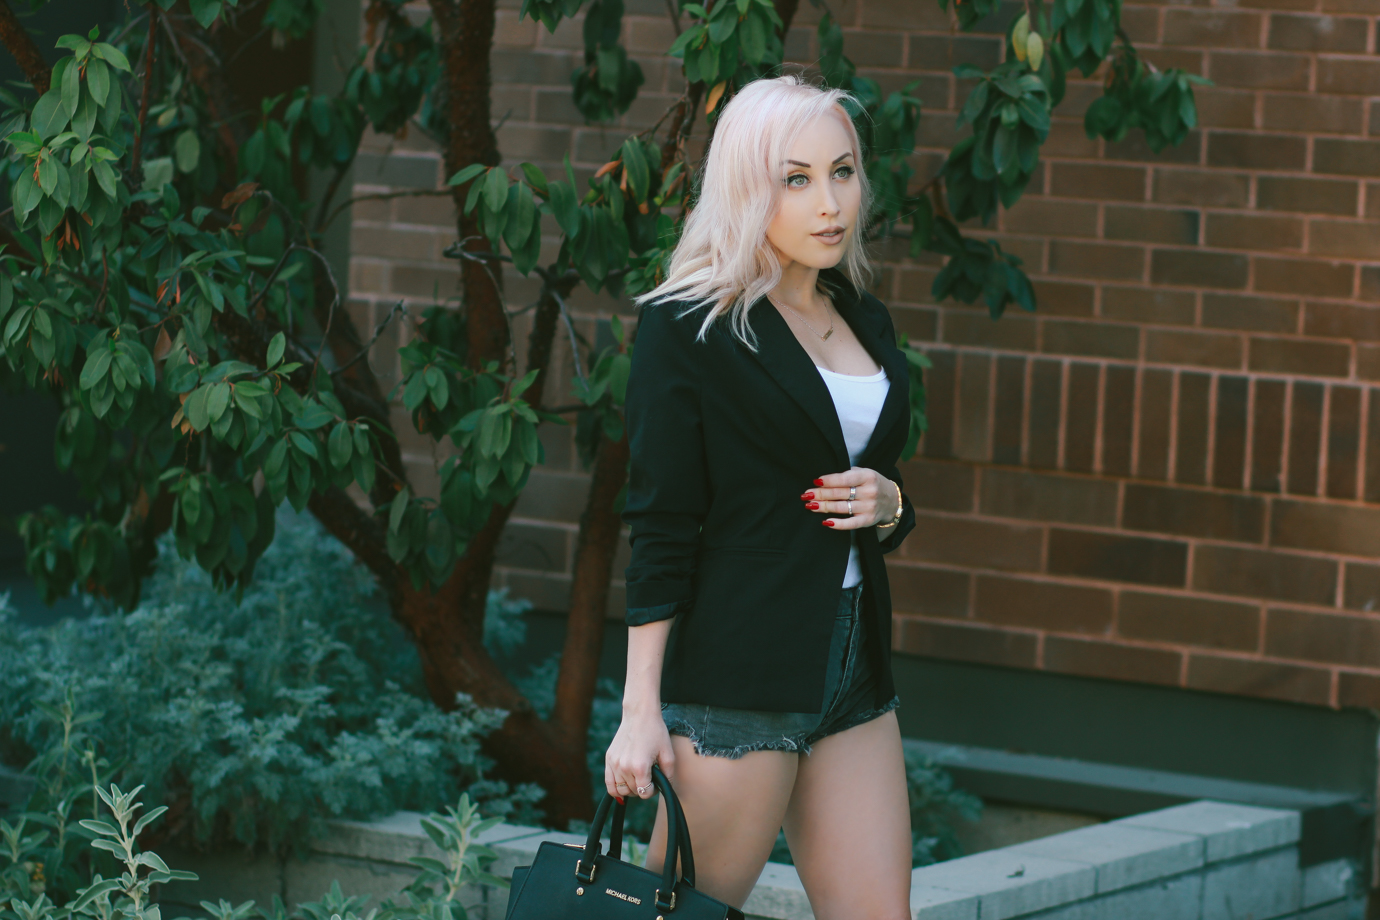 Blondie in the City | How To Style A Blazer | Street Style 